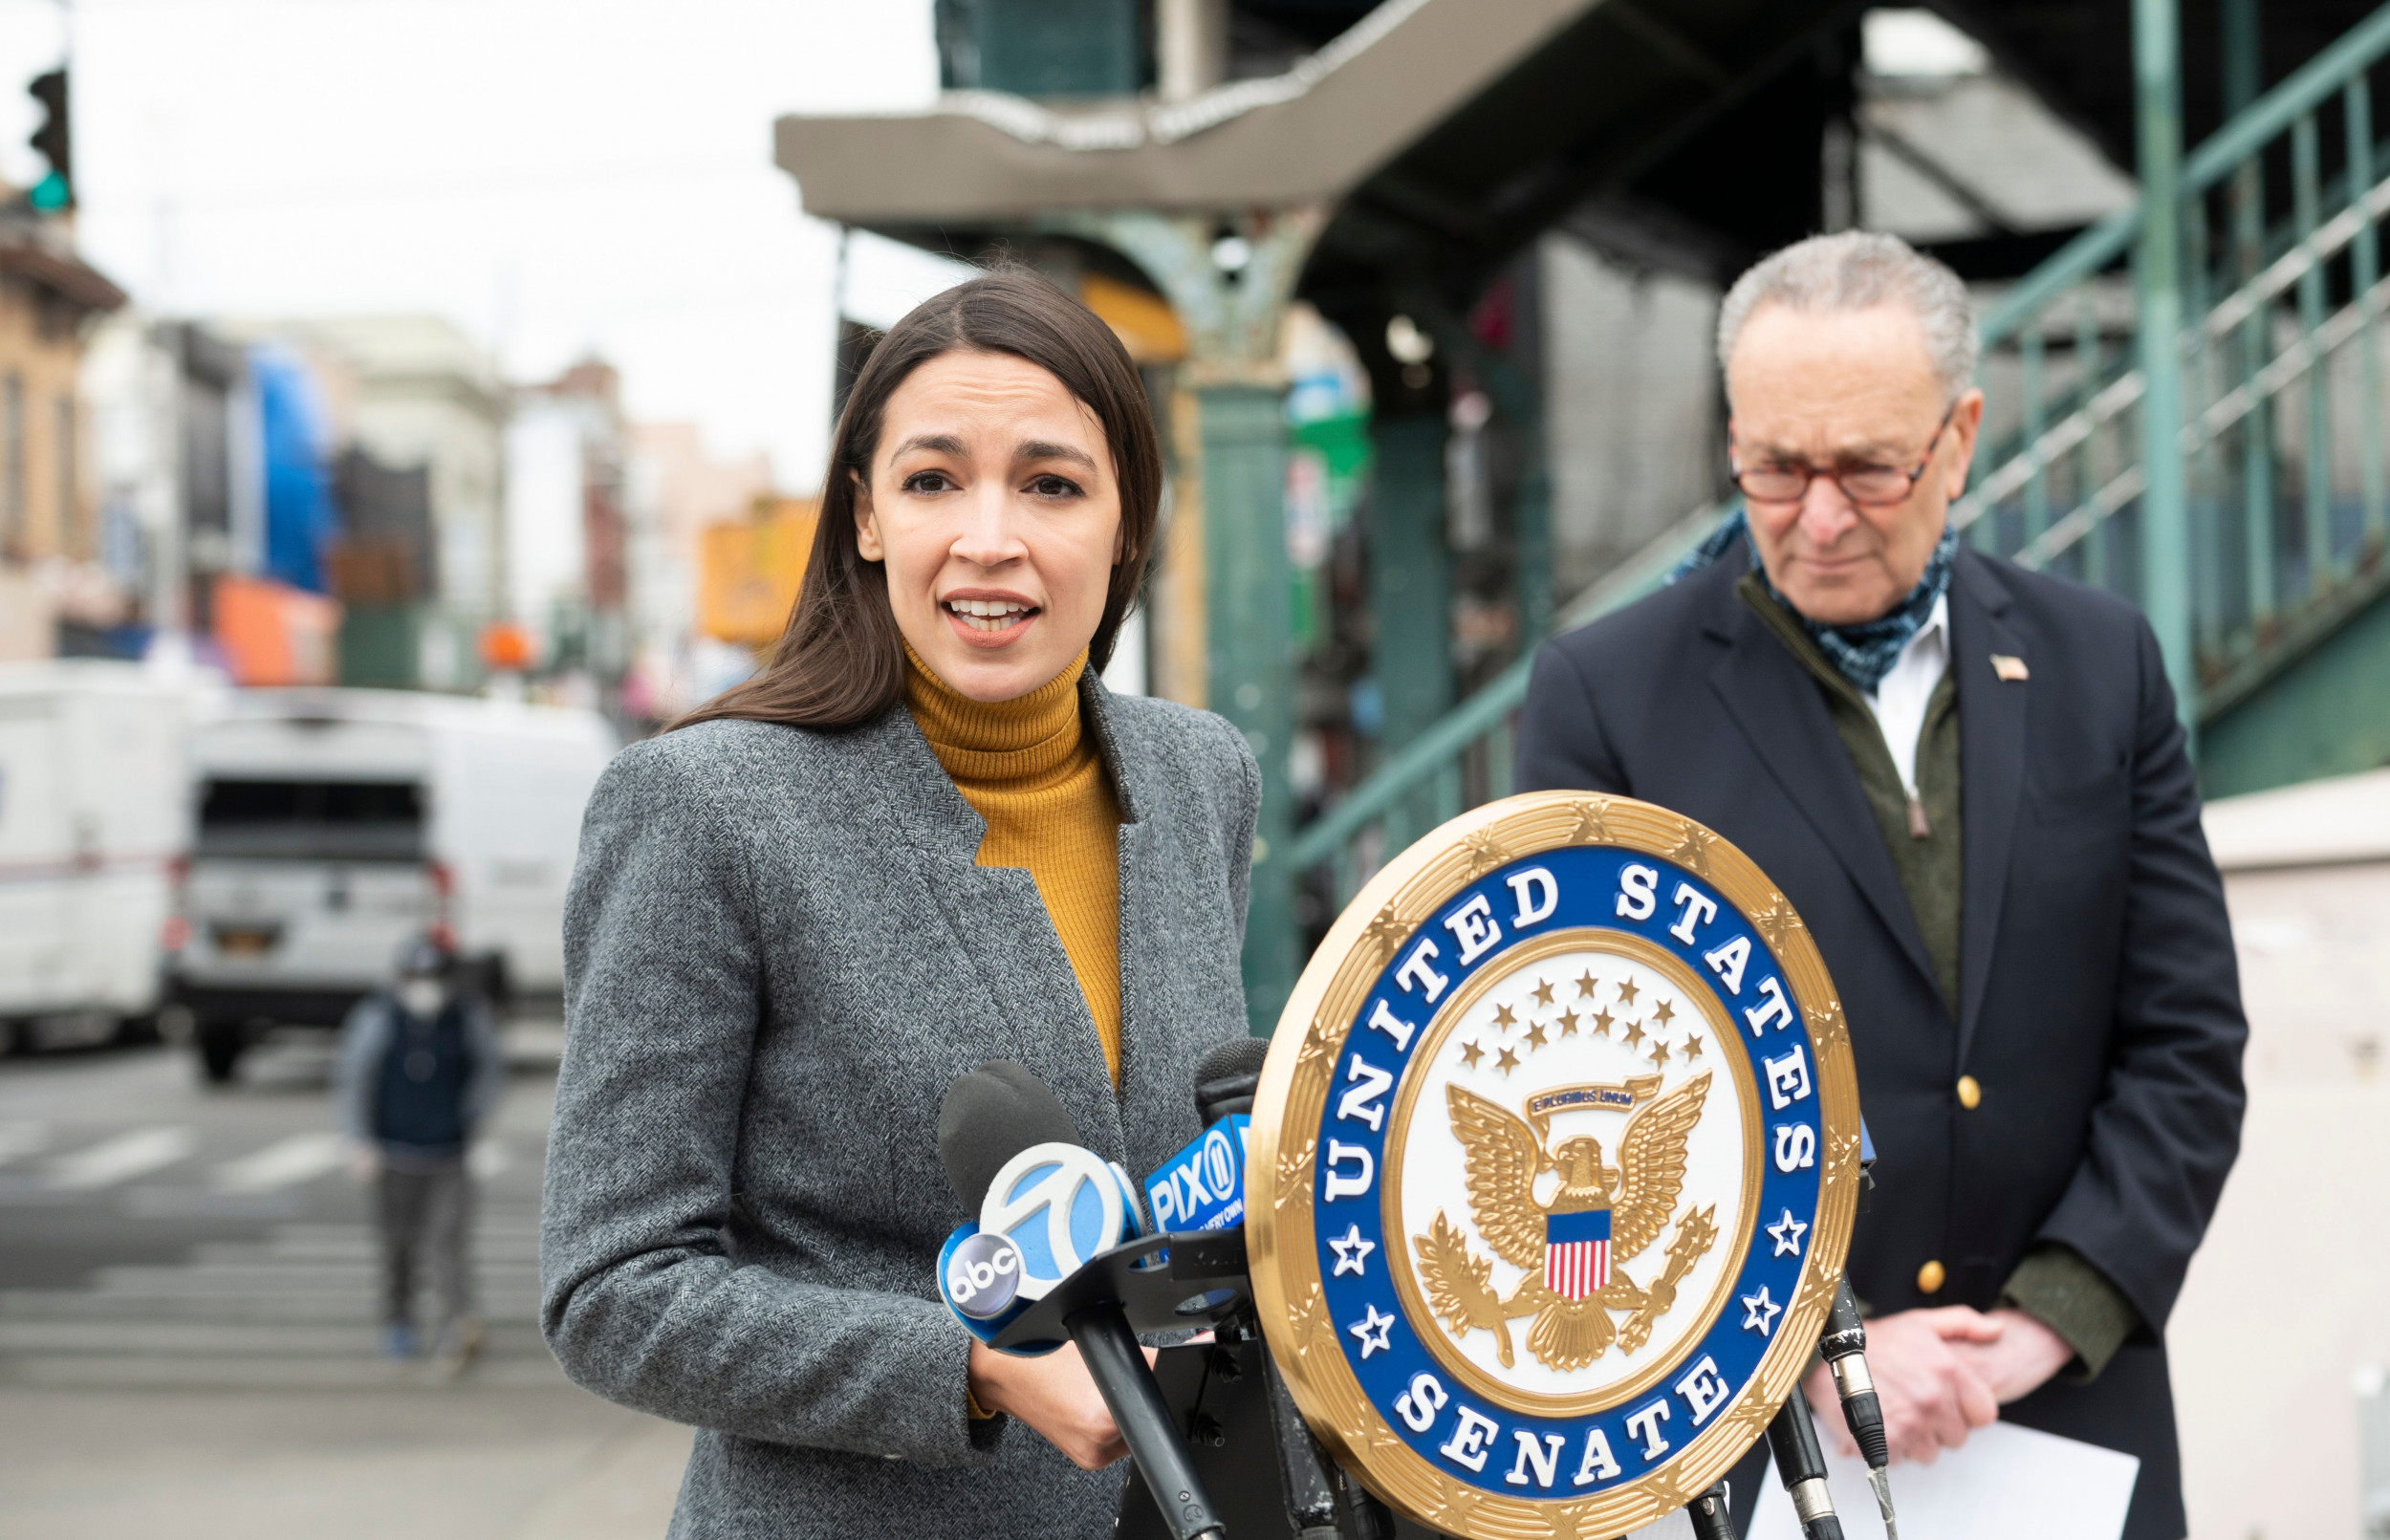 AOC criticizes Josh Hawley for “crying over a book contract” after he “fueled a riot”